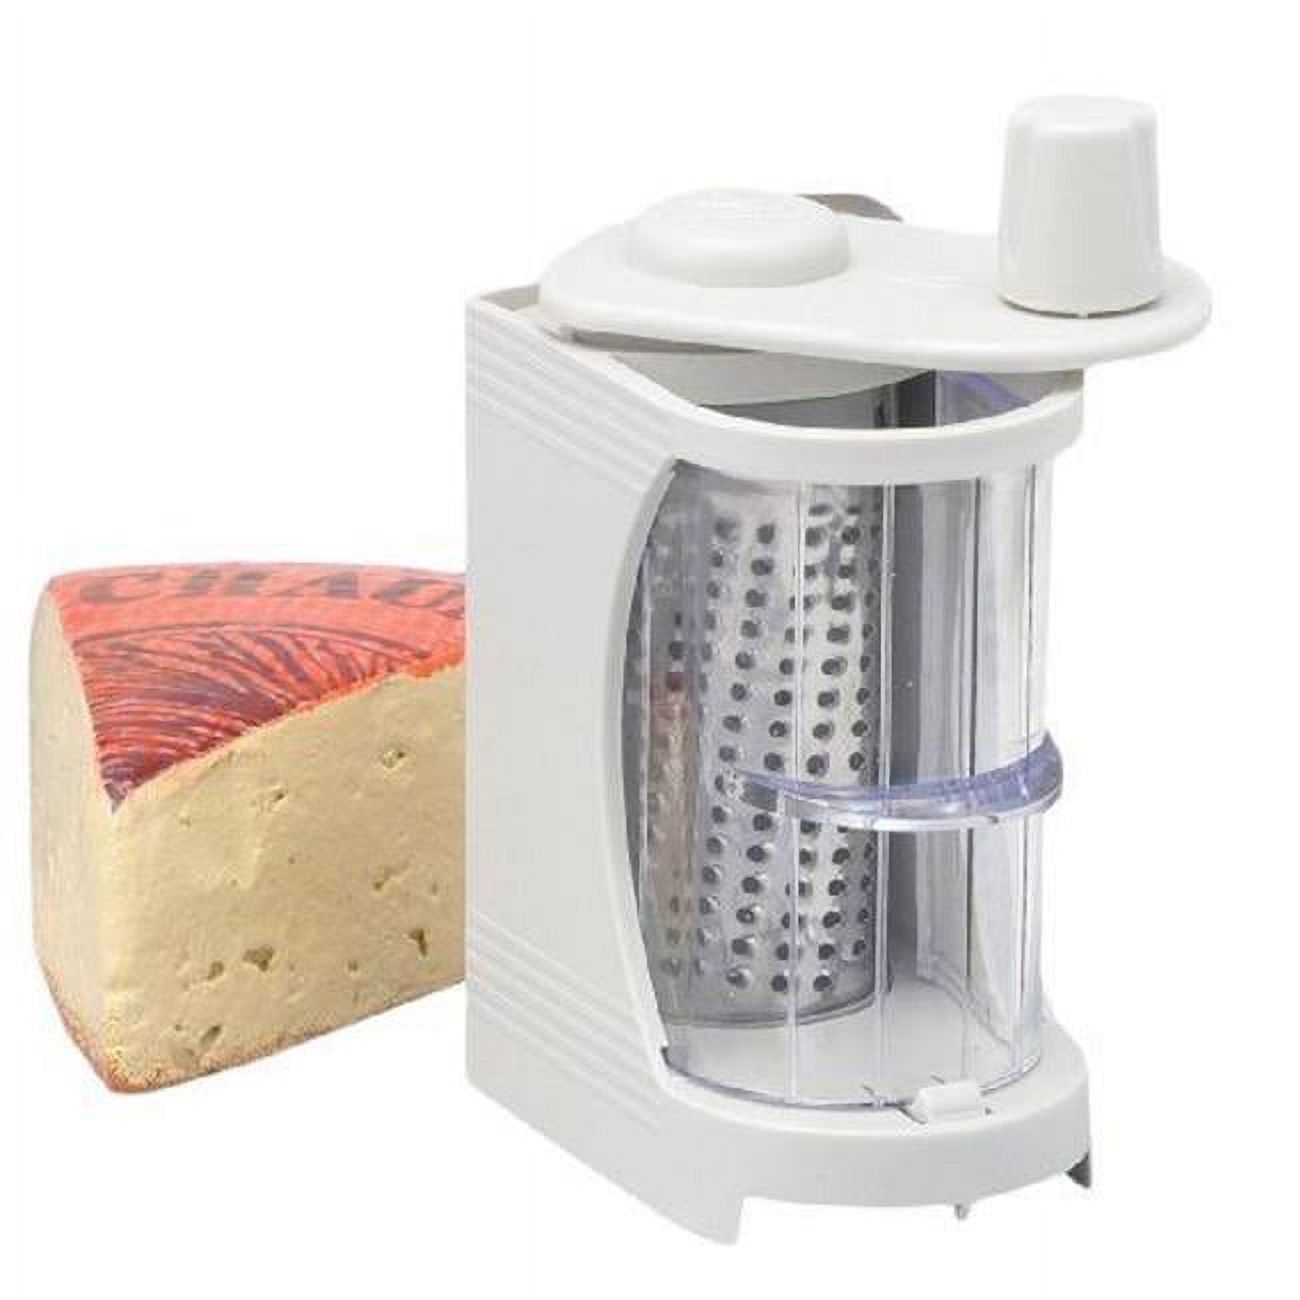 ACEA V83 Table Cheese Grater - image 1 of 1